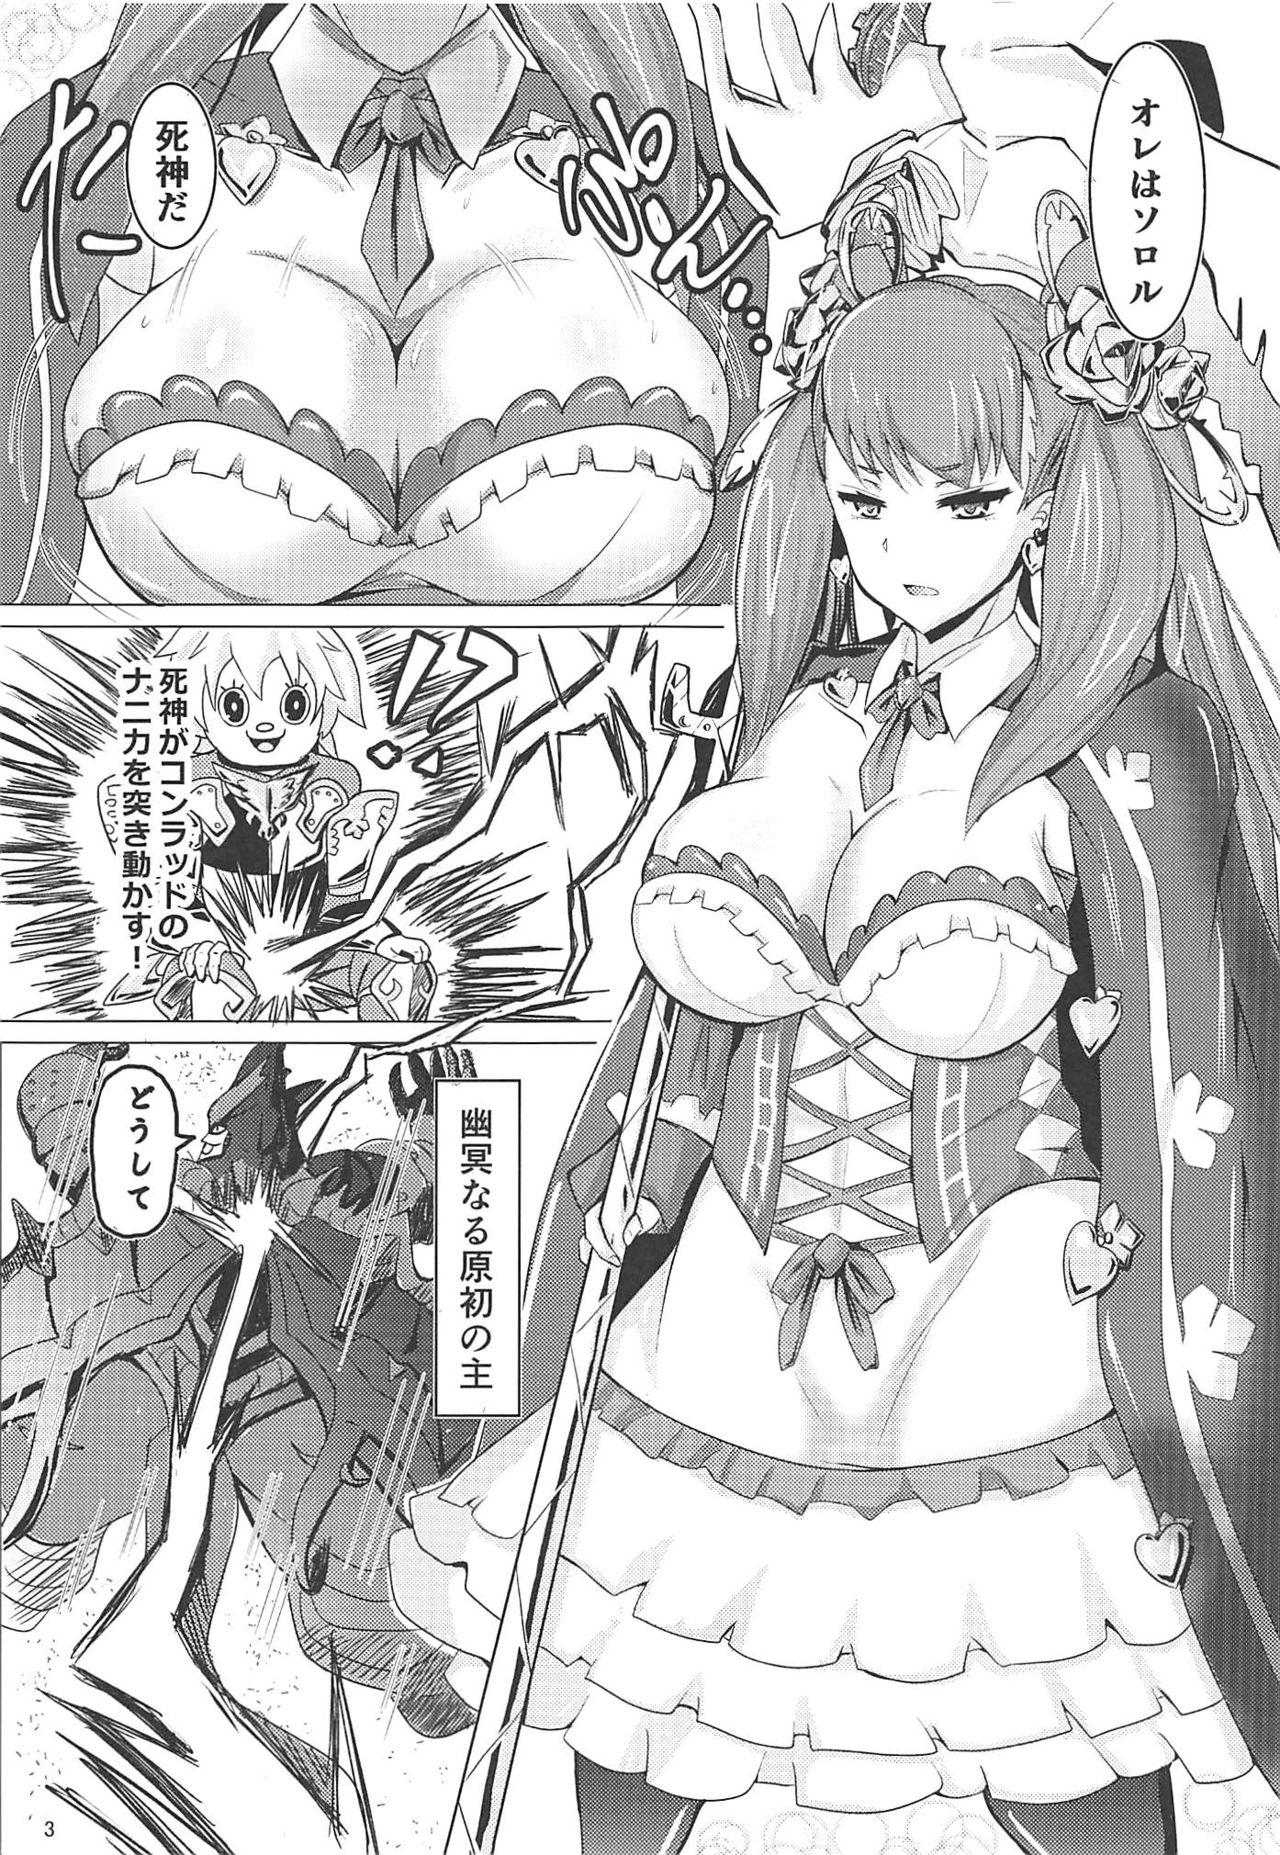 Titties Death in General + C96 Omake Paper - Etrian odyssey Round Ass - Page 2